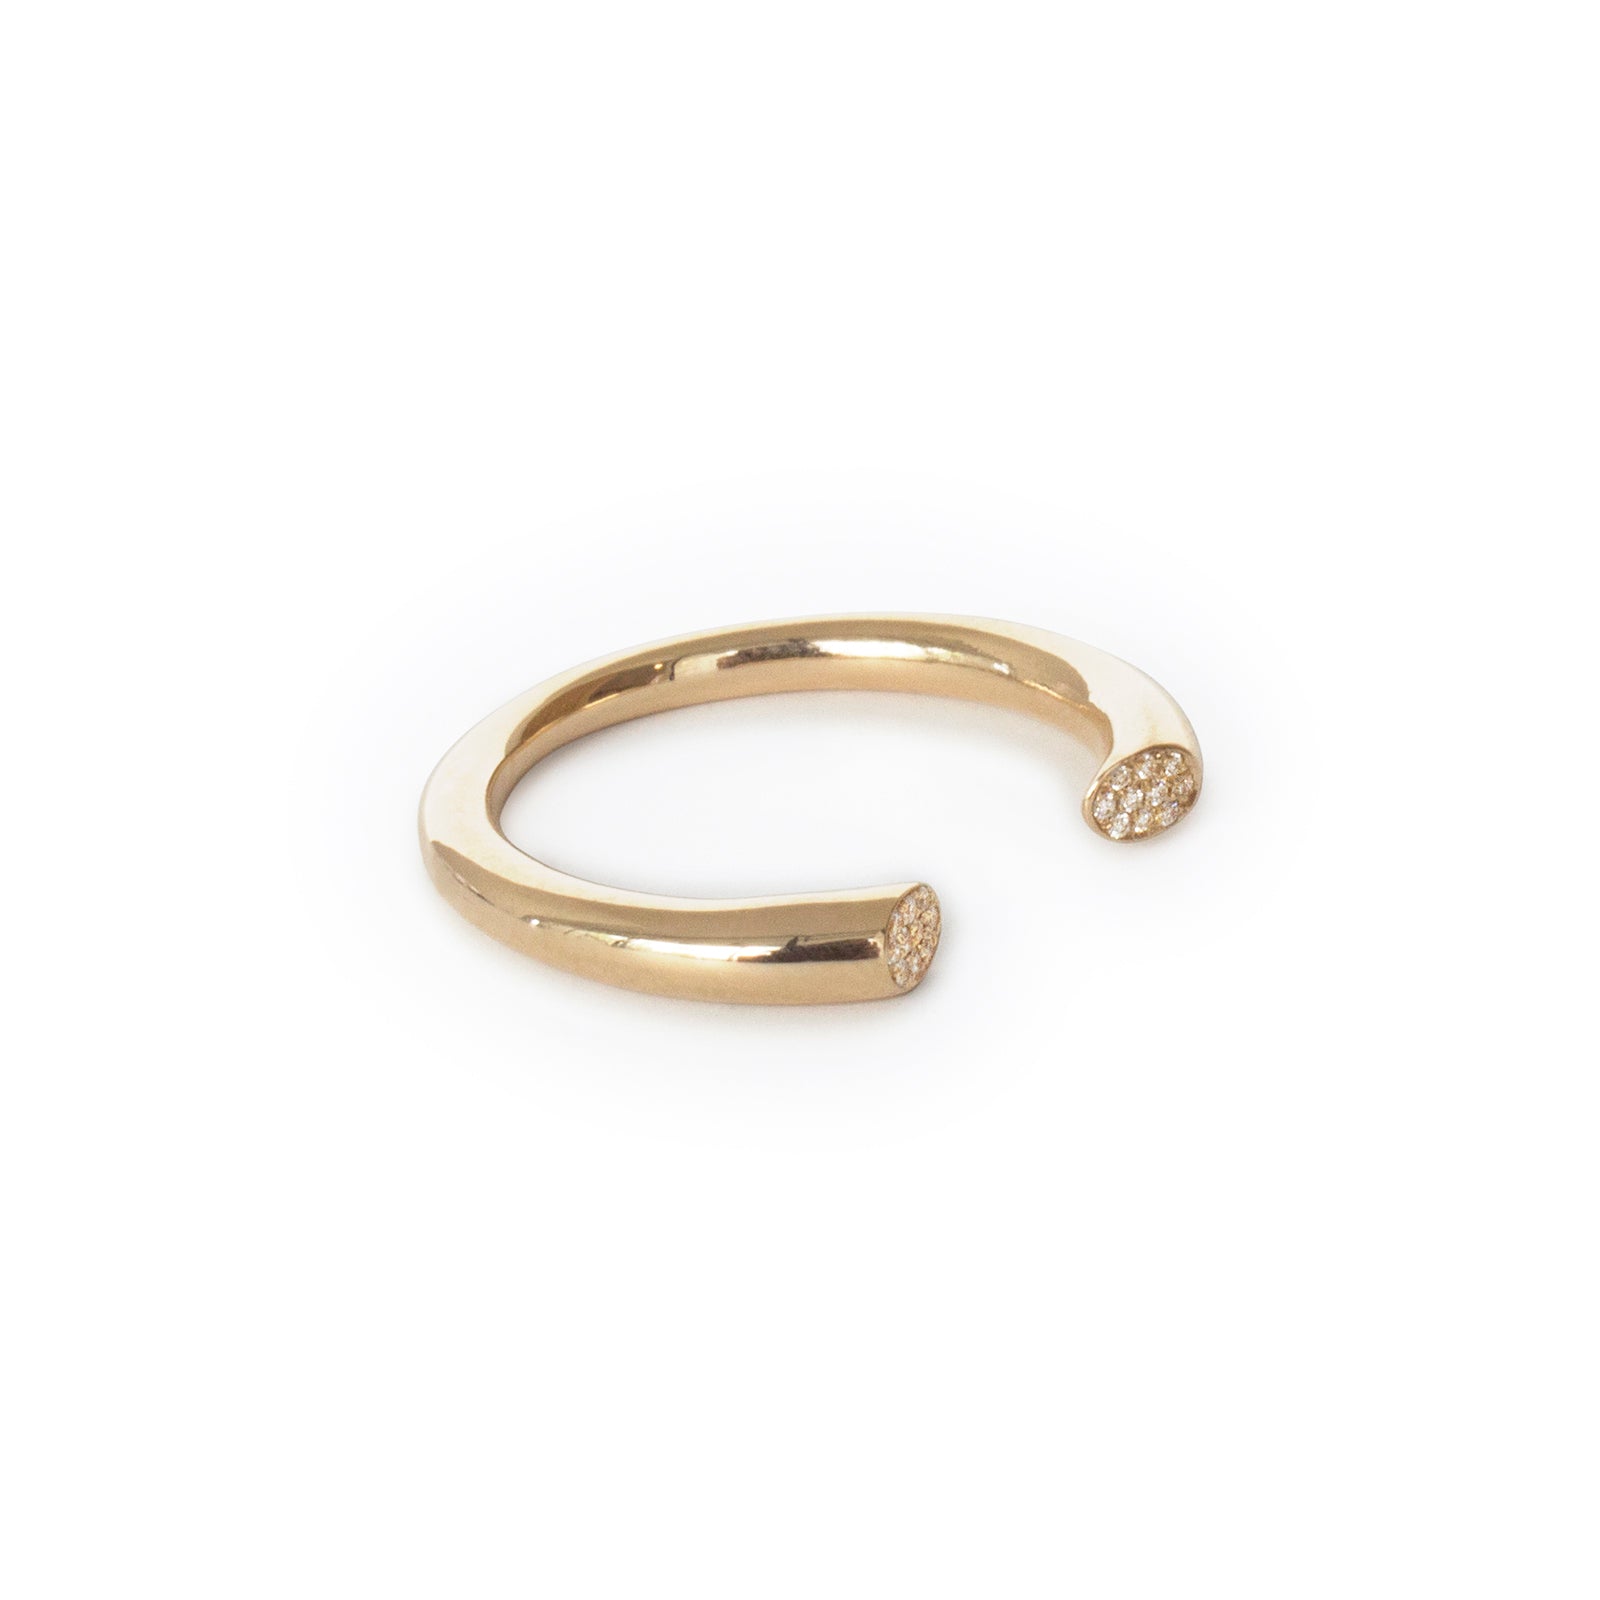 14k yellow gold w/white diamonds / thick / 6 arpent stacking rings with diamonds